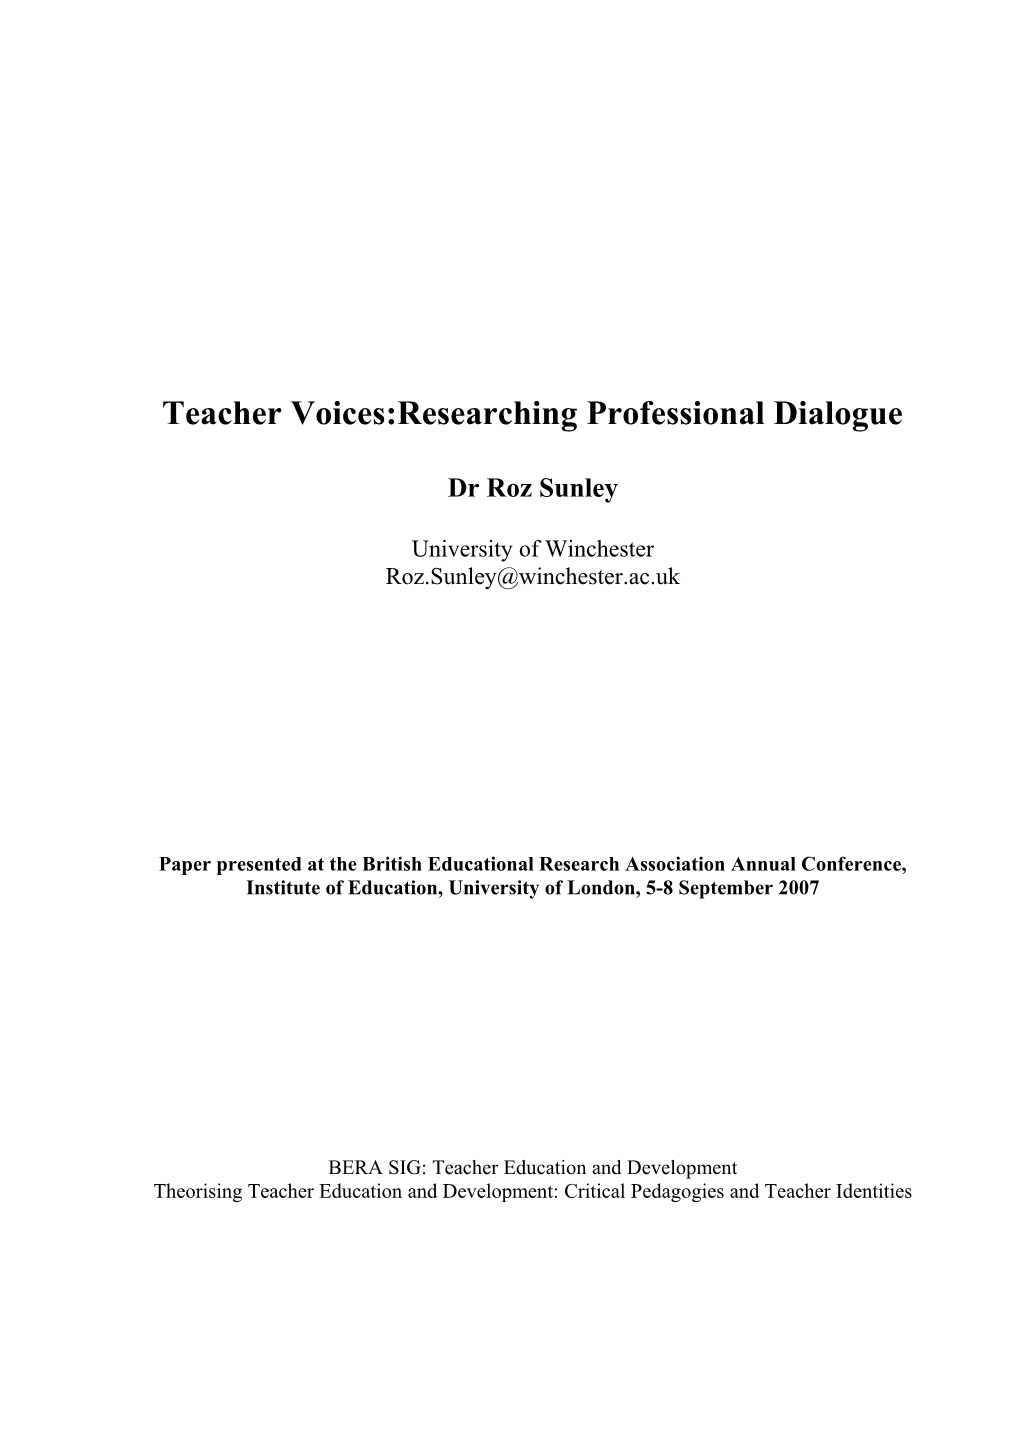 Teacher Voices: Researching Professional Dialogue